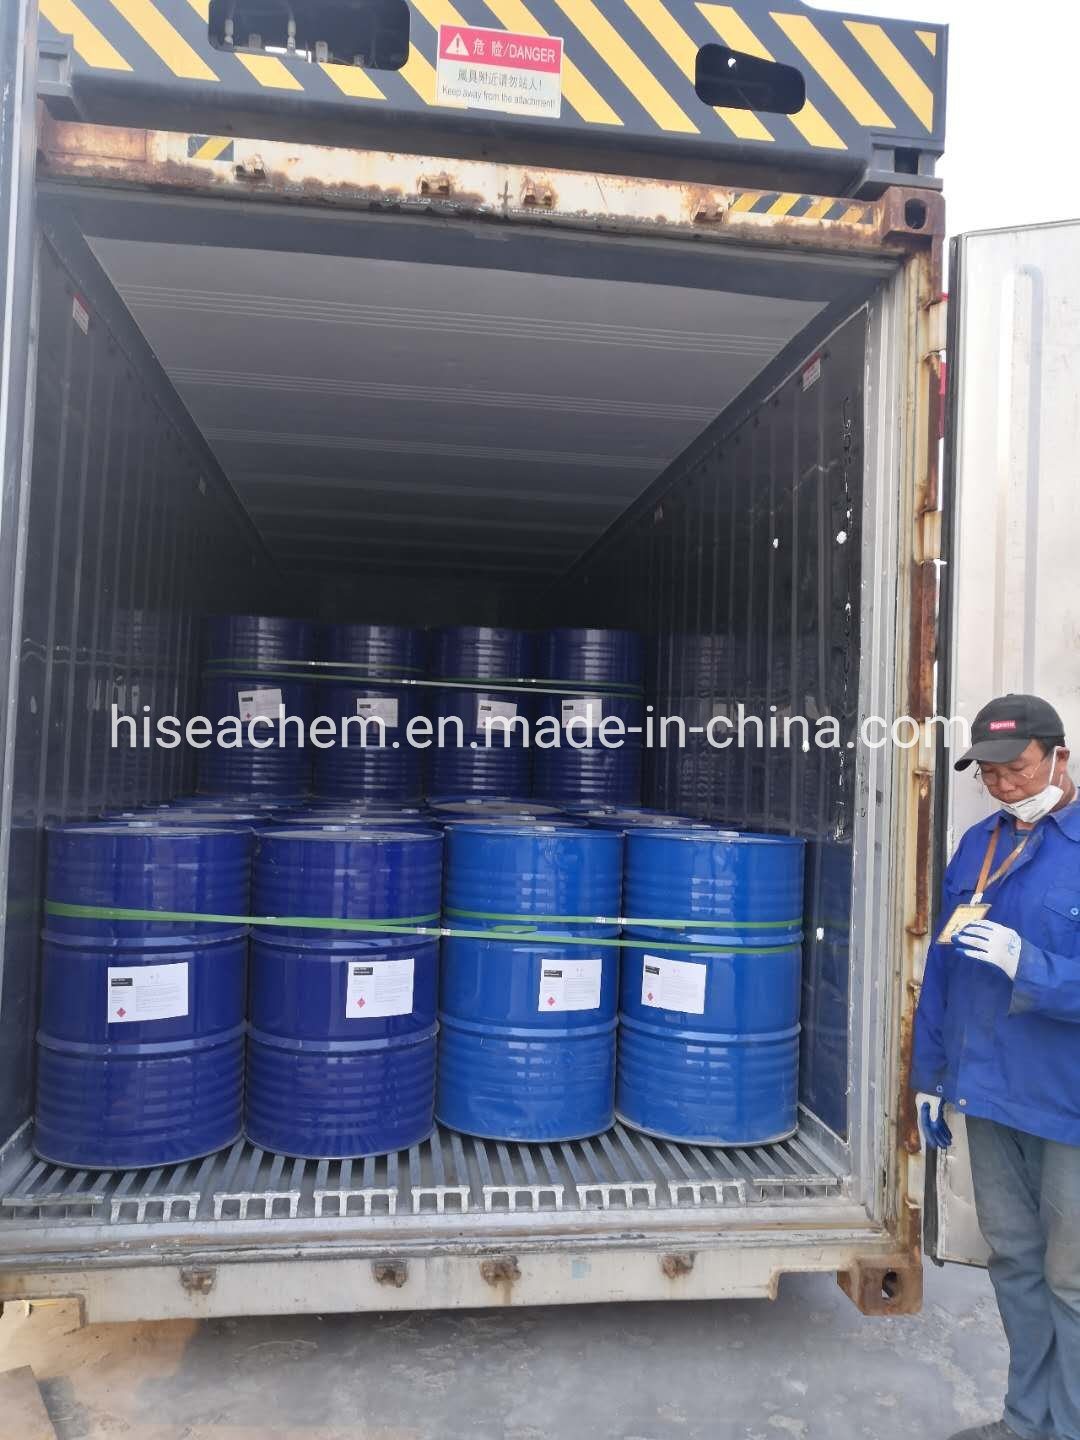 China Best Quality Industrial Grade CAS 79-09-4 Propanoic Acid Mainly